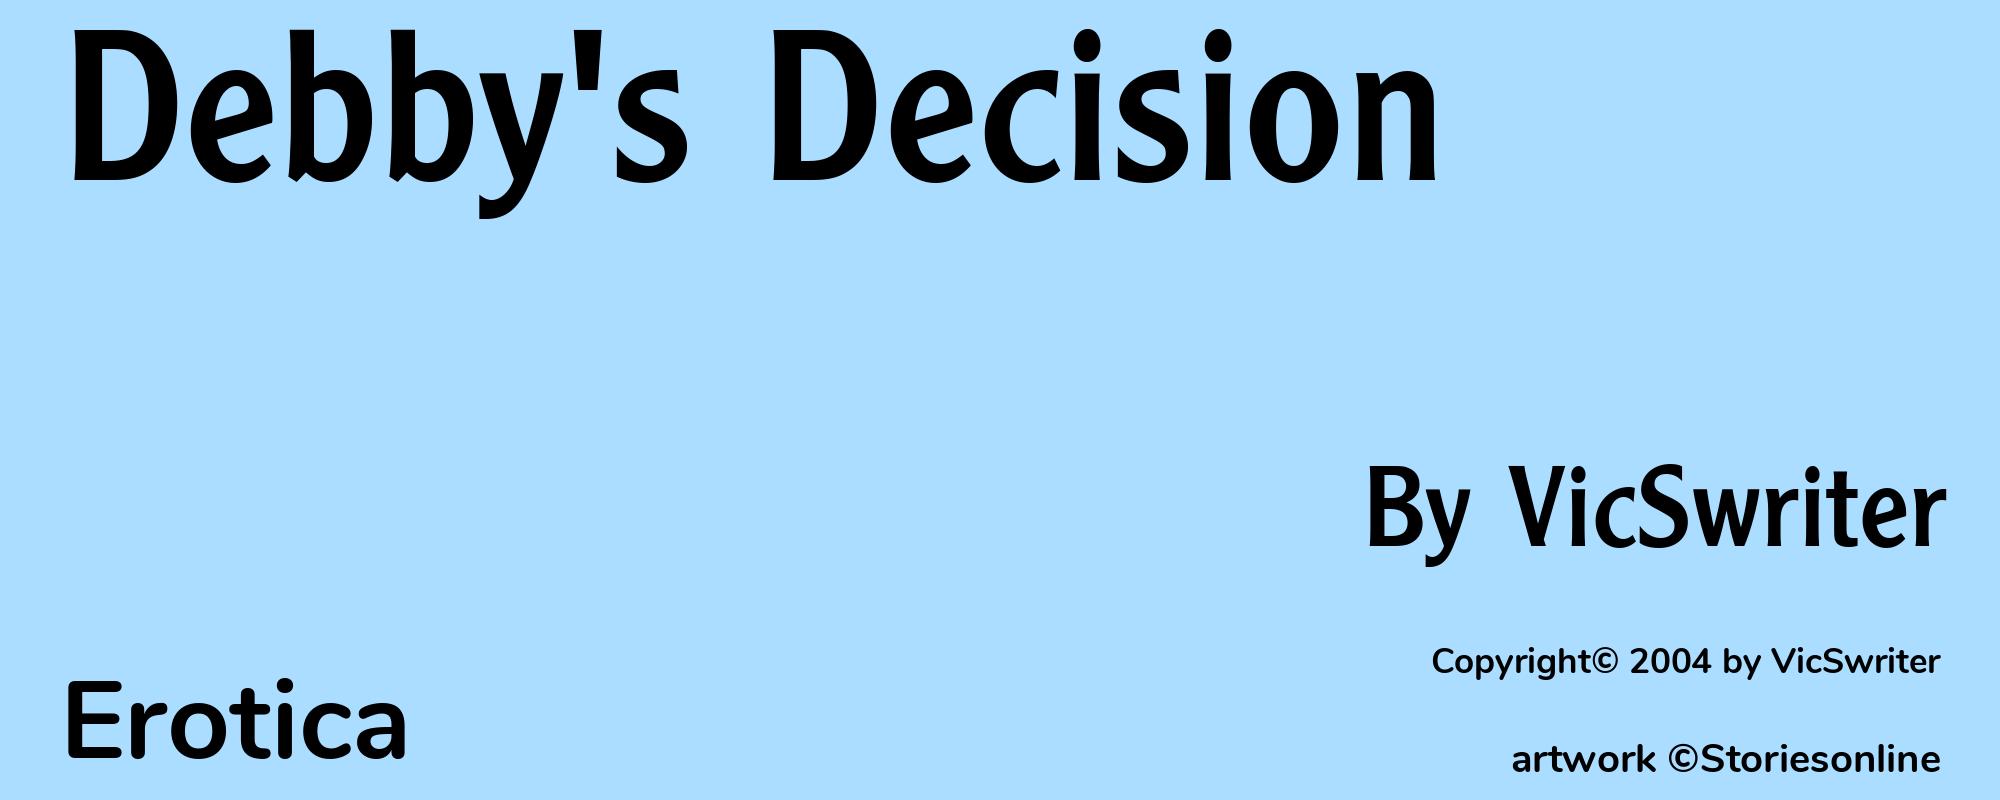 Debby's Decision - Cover